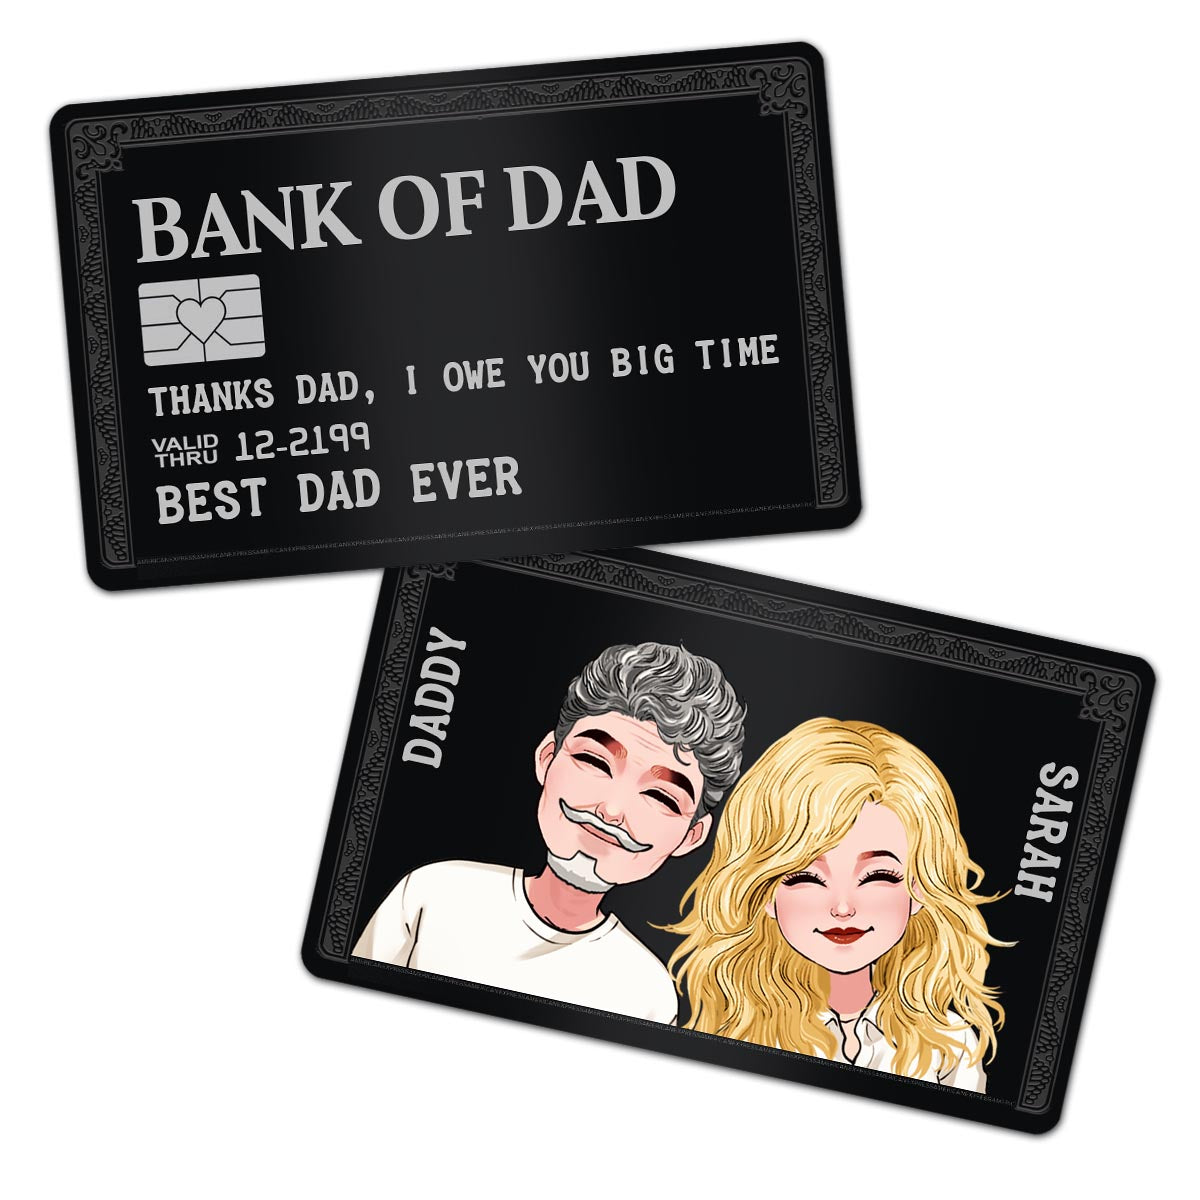 Bank Of Dad - Personalized Father's Day Father Wallet Insert Card